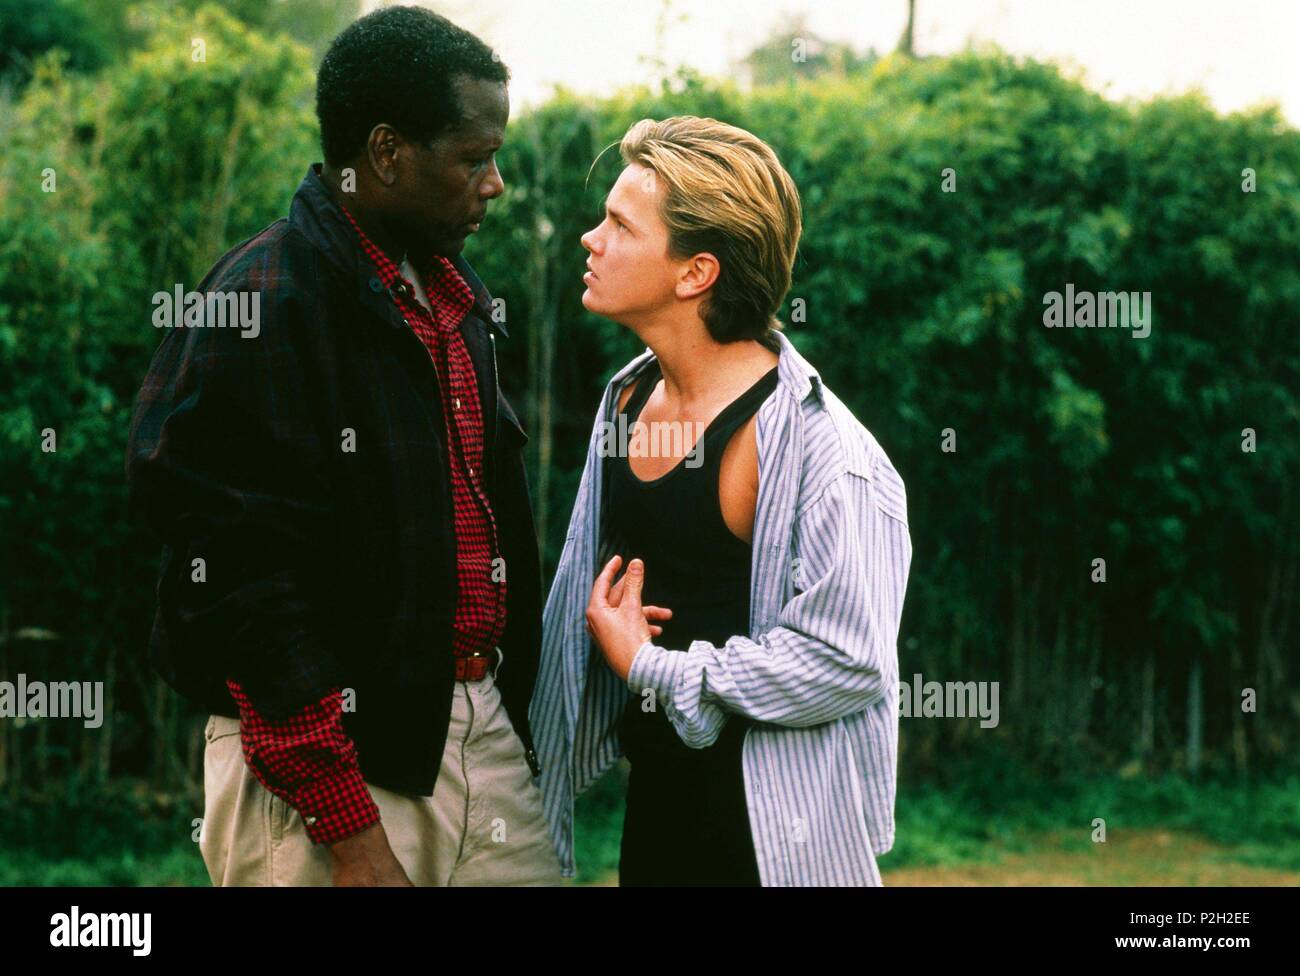 Description: Jul 09, 1988; Hollywood, CA, USA; Actors SIDNEY POITIER as Roy Parmenter and RIVER PHOENIX as Jeff Grant star in the drama thriller 'Little Nikita' directed by Richard Benjamin..  Original Film Title: LITTLE NIKITA.  English Title: LITTLE NIKITA.  Film Director: RICHARD BENJAMIN.  Year: 1988.  Stars: SIDNEY POITIER; RIVER PHOENIX. Stock Photo